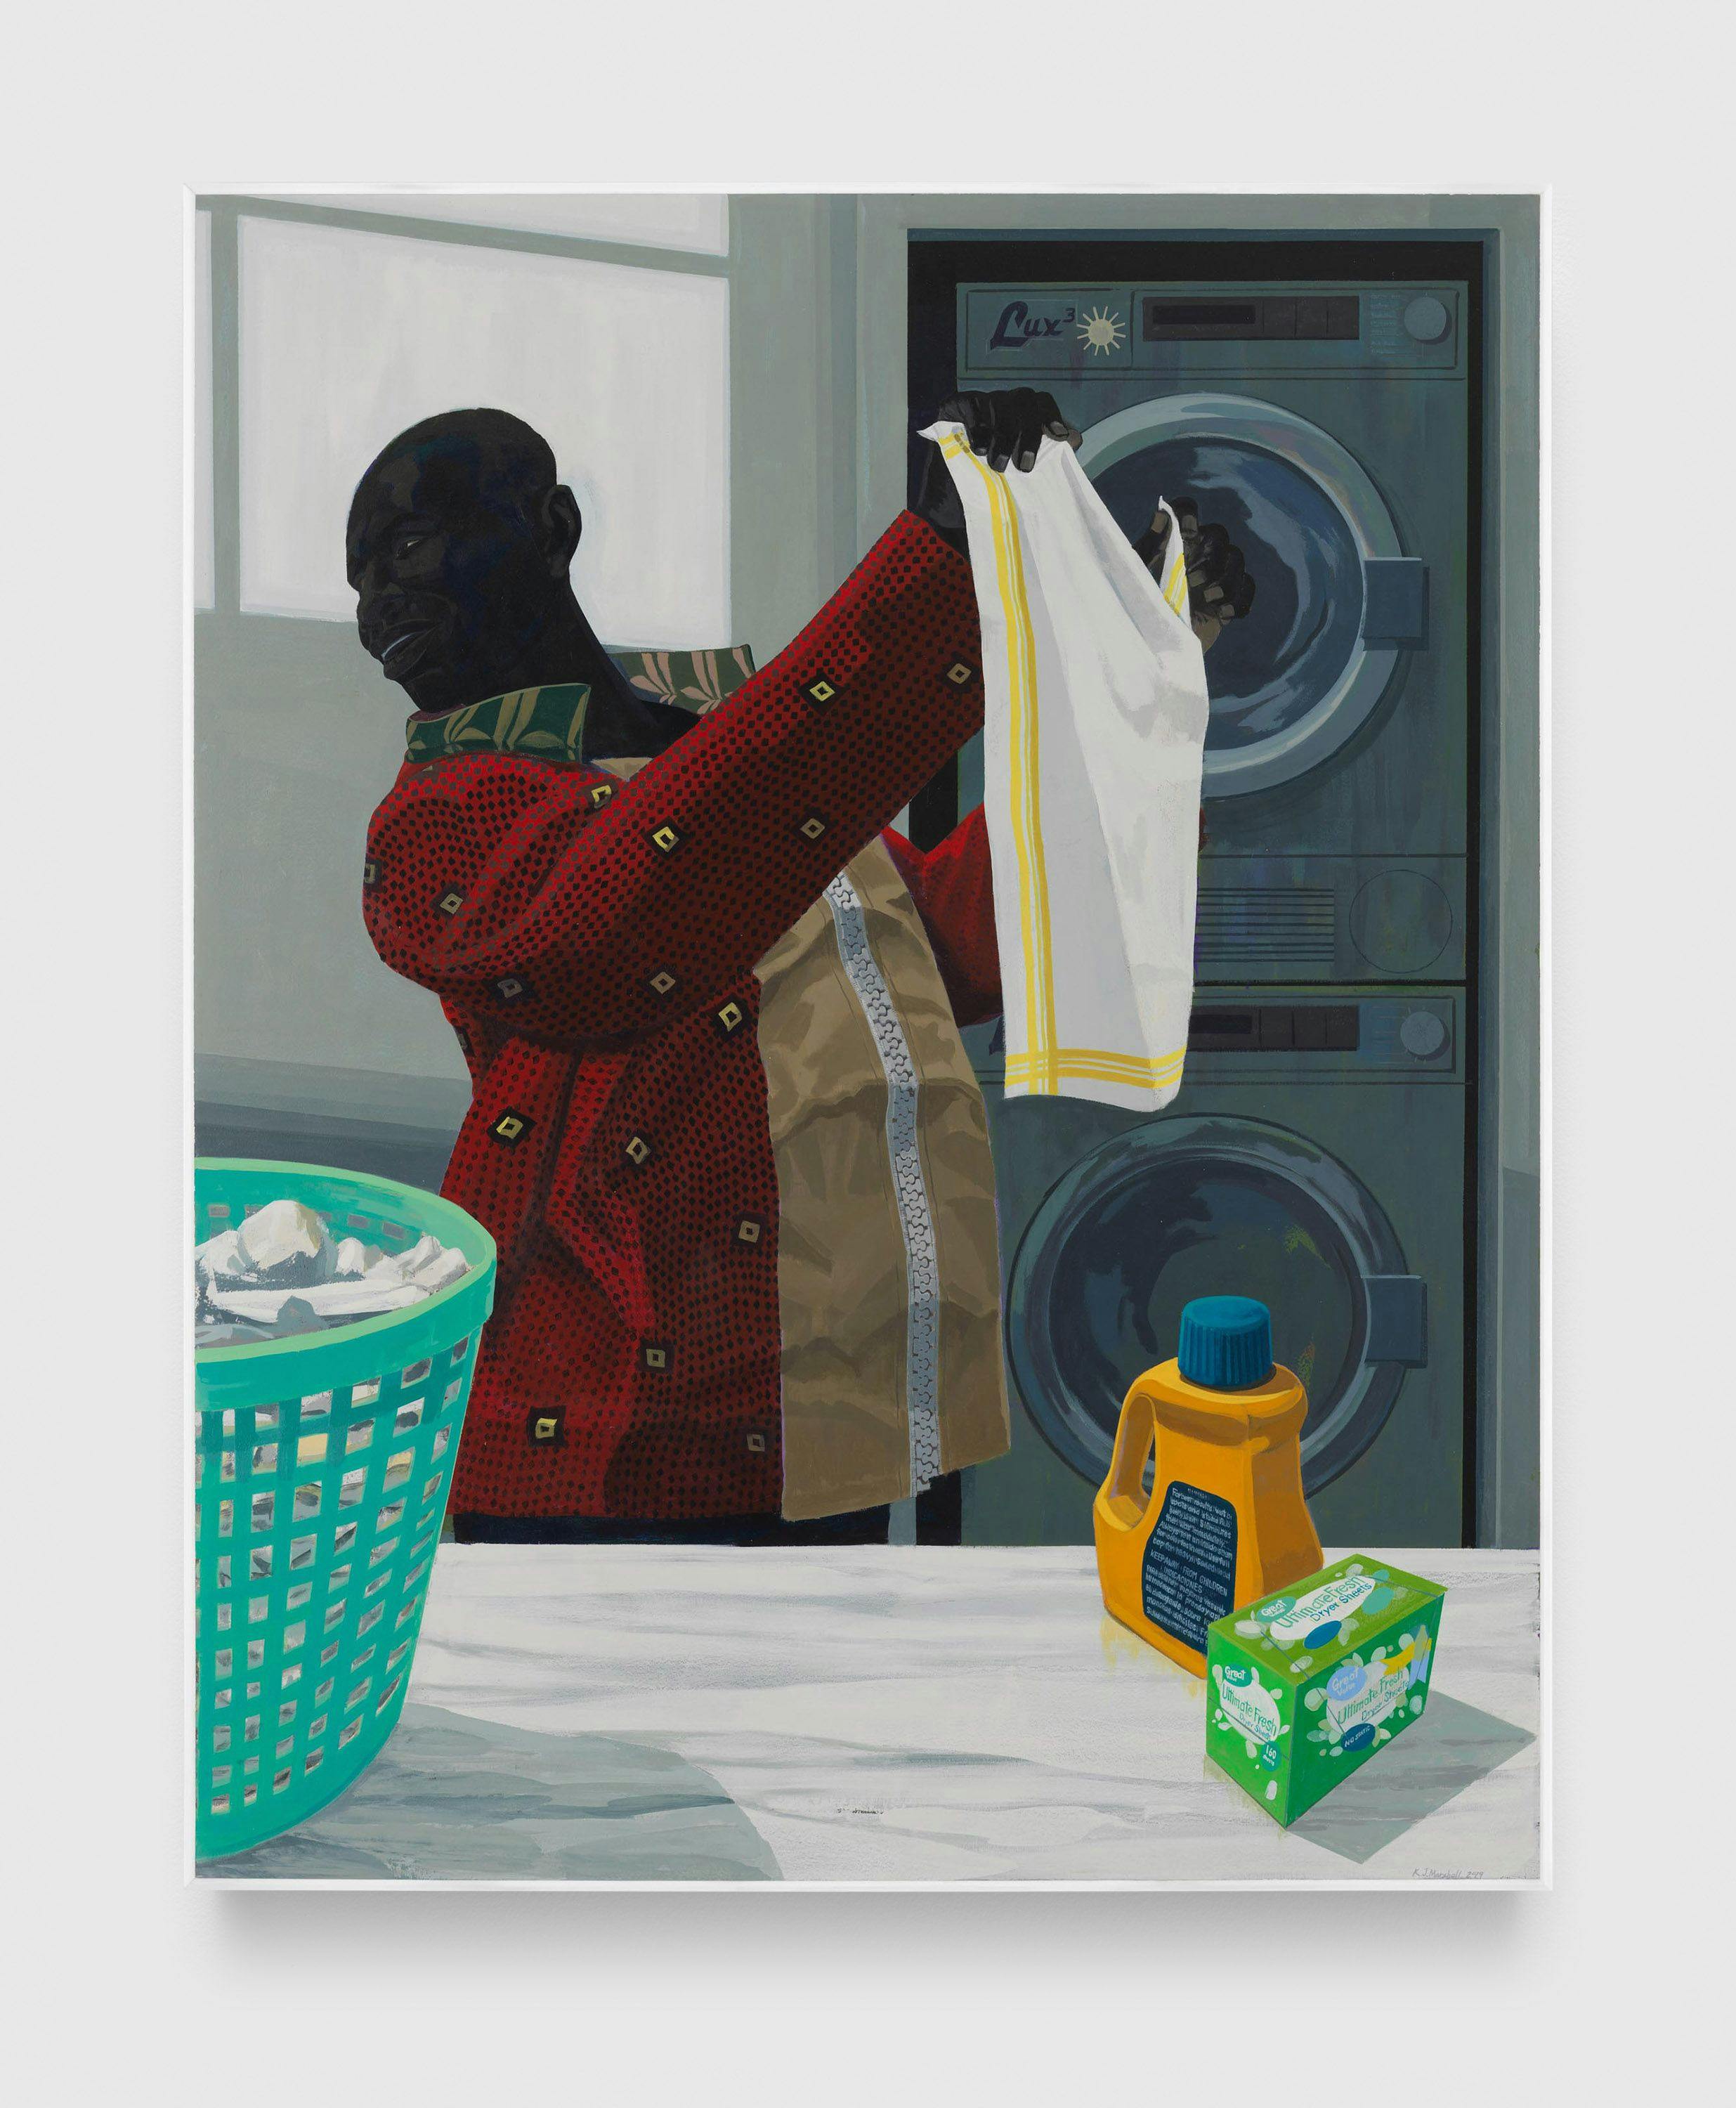 A painting by Kerry James Marshall, titled Laundry Man, dated 2019.